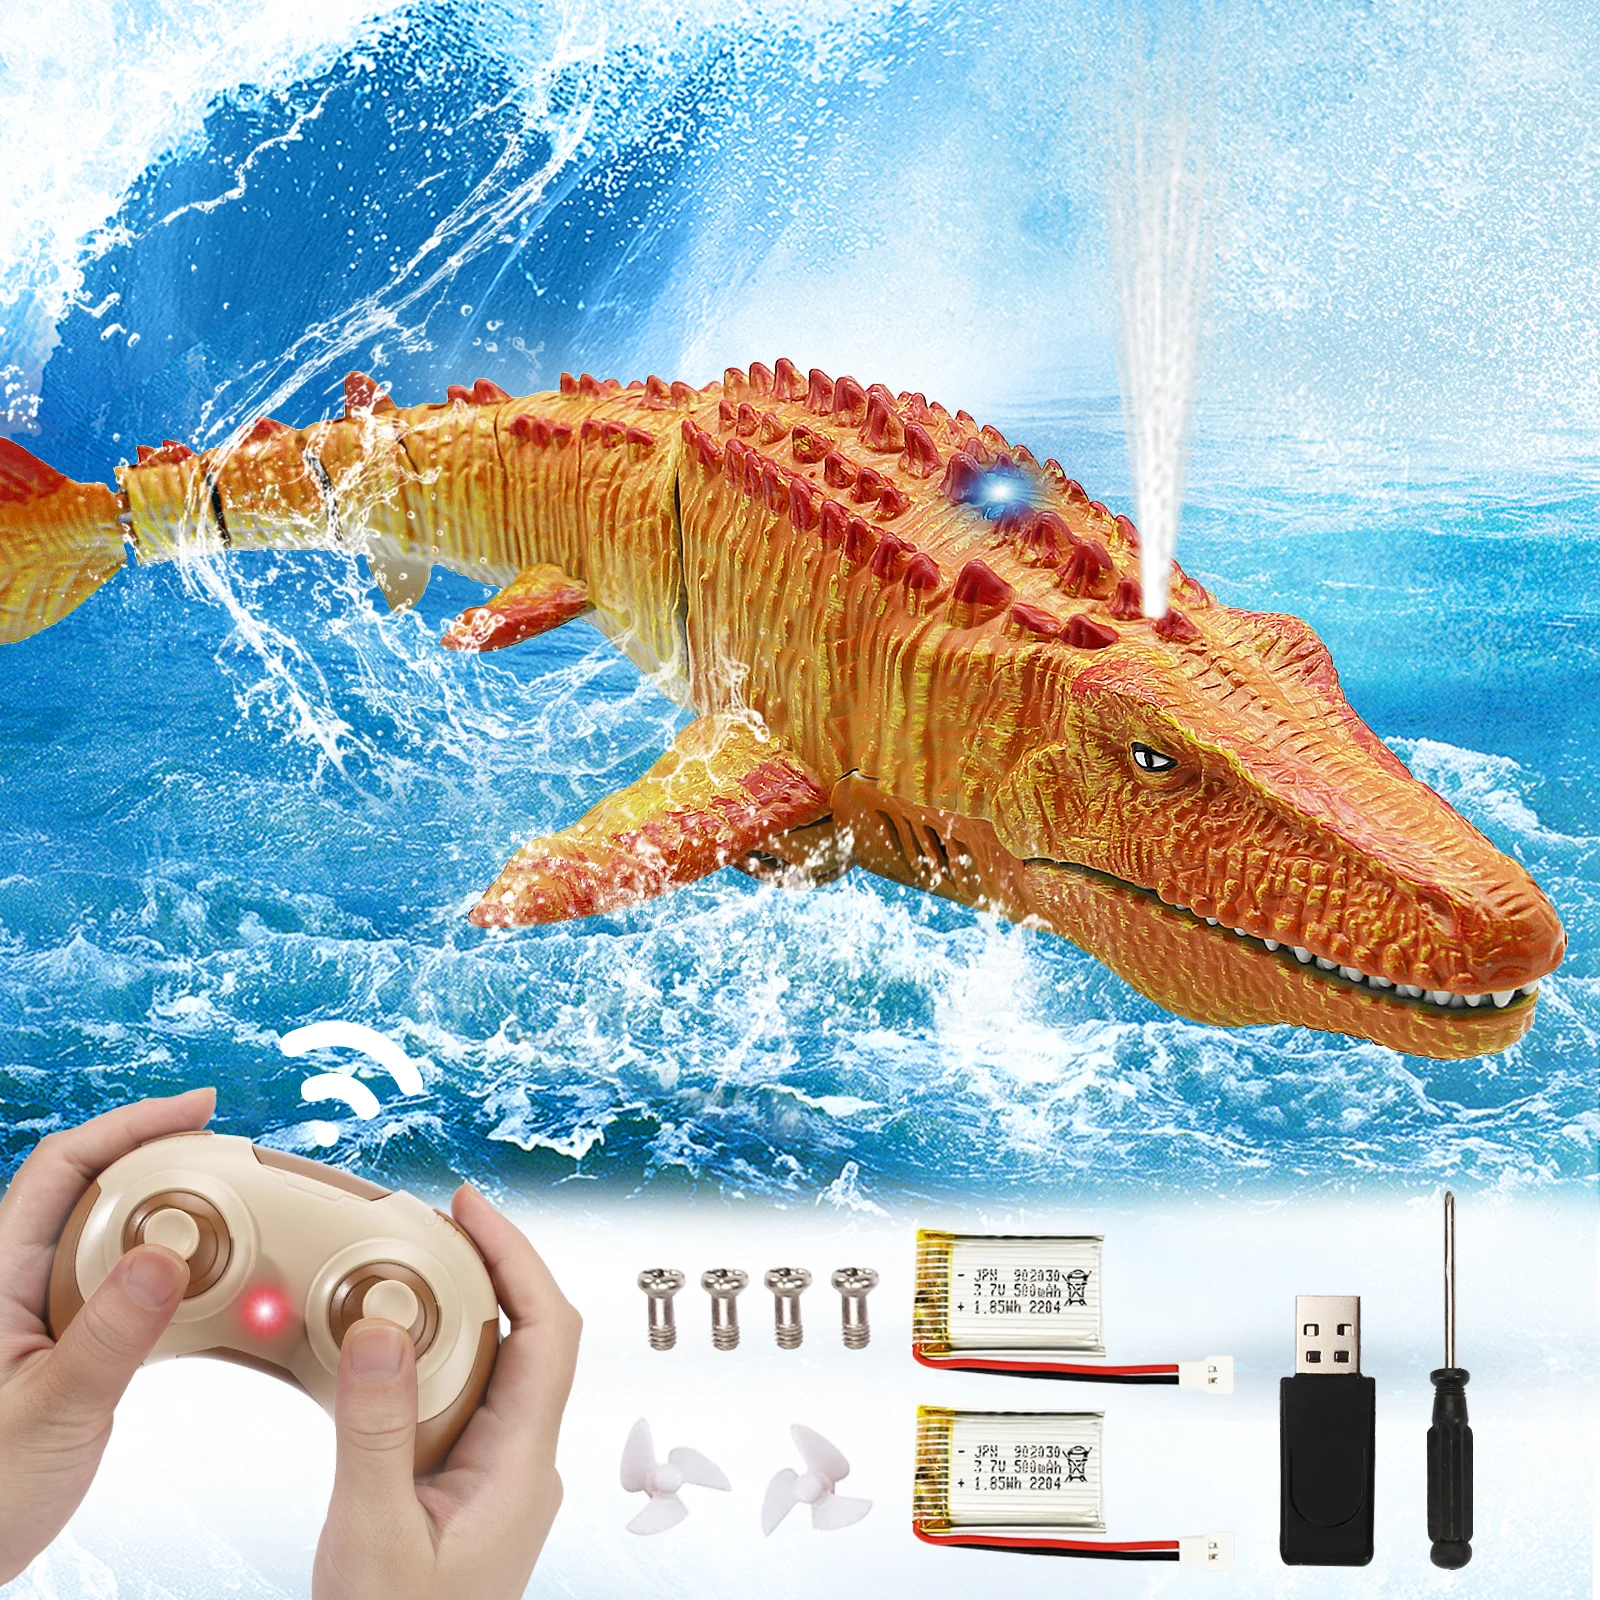 

QDRAGON 2.4G Remote Control Dinosaur Pool Toys for Kids,Lake/Swimming Pool/Bath/Outdoor RC Mosasaurus Boats Toys with Batteries